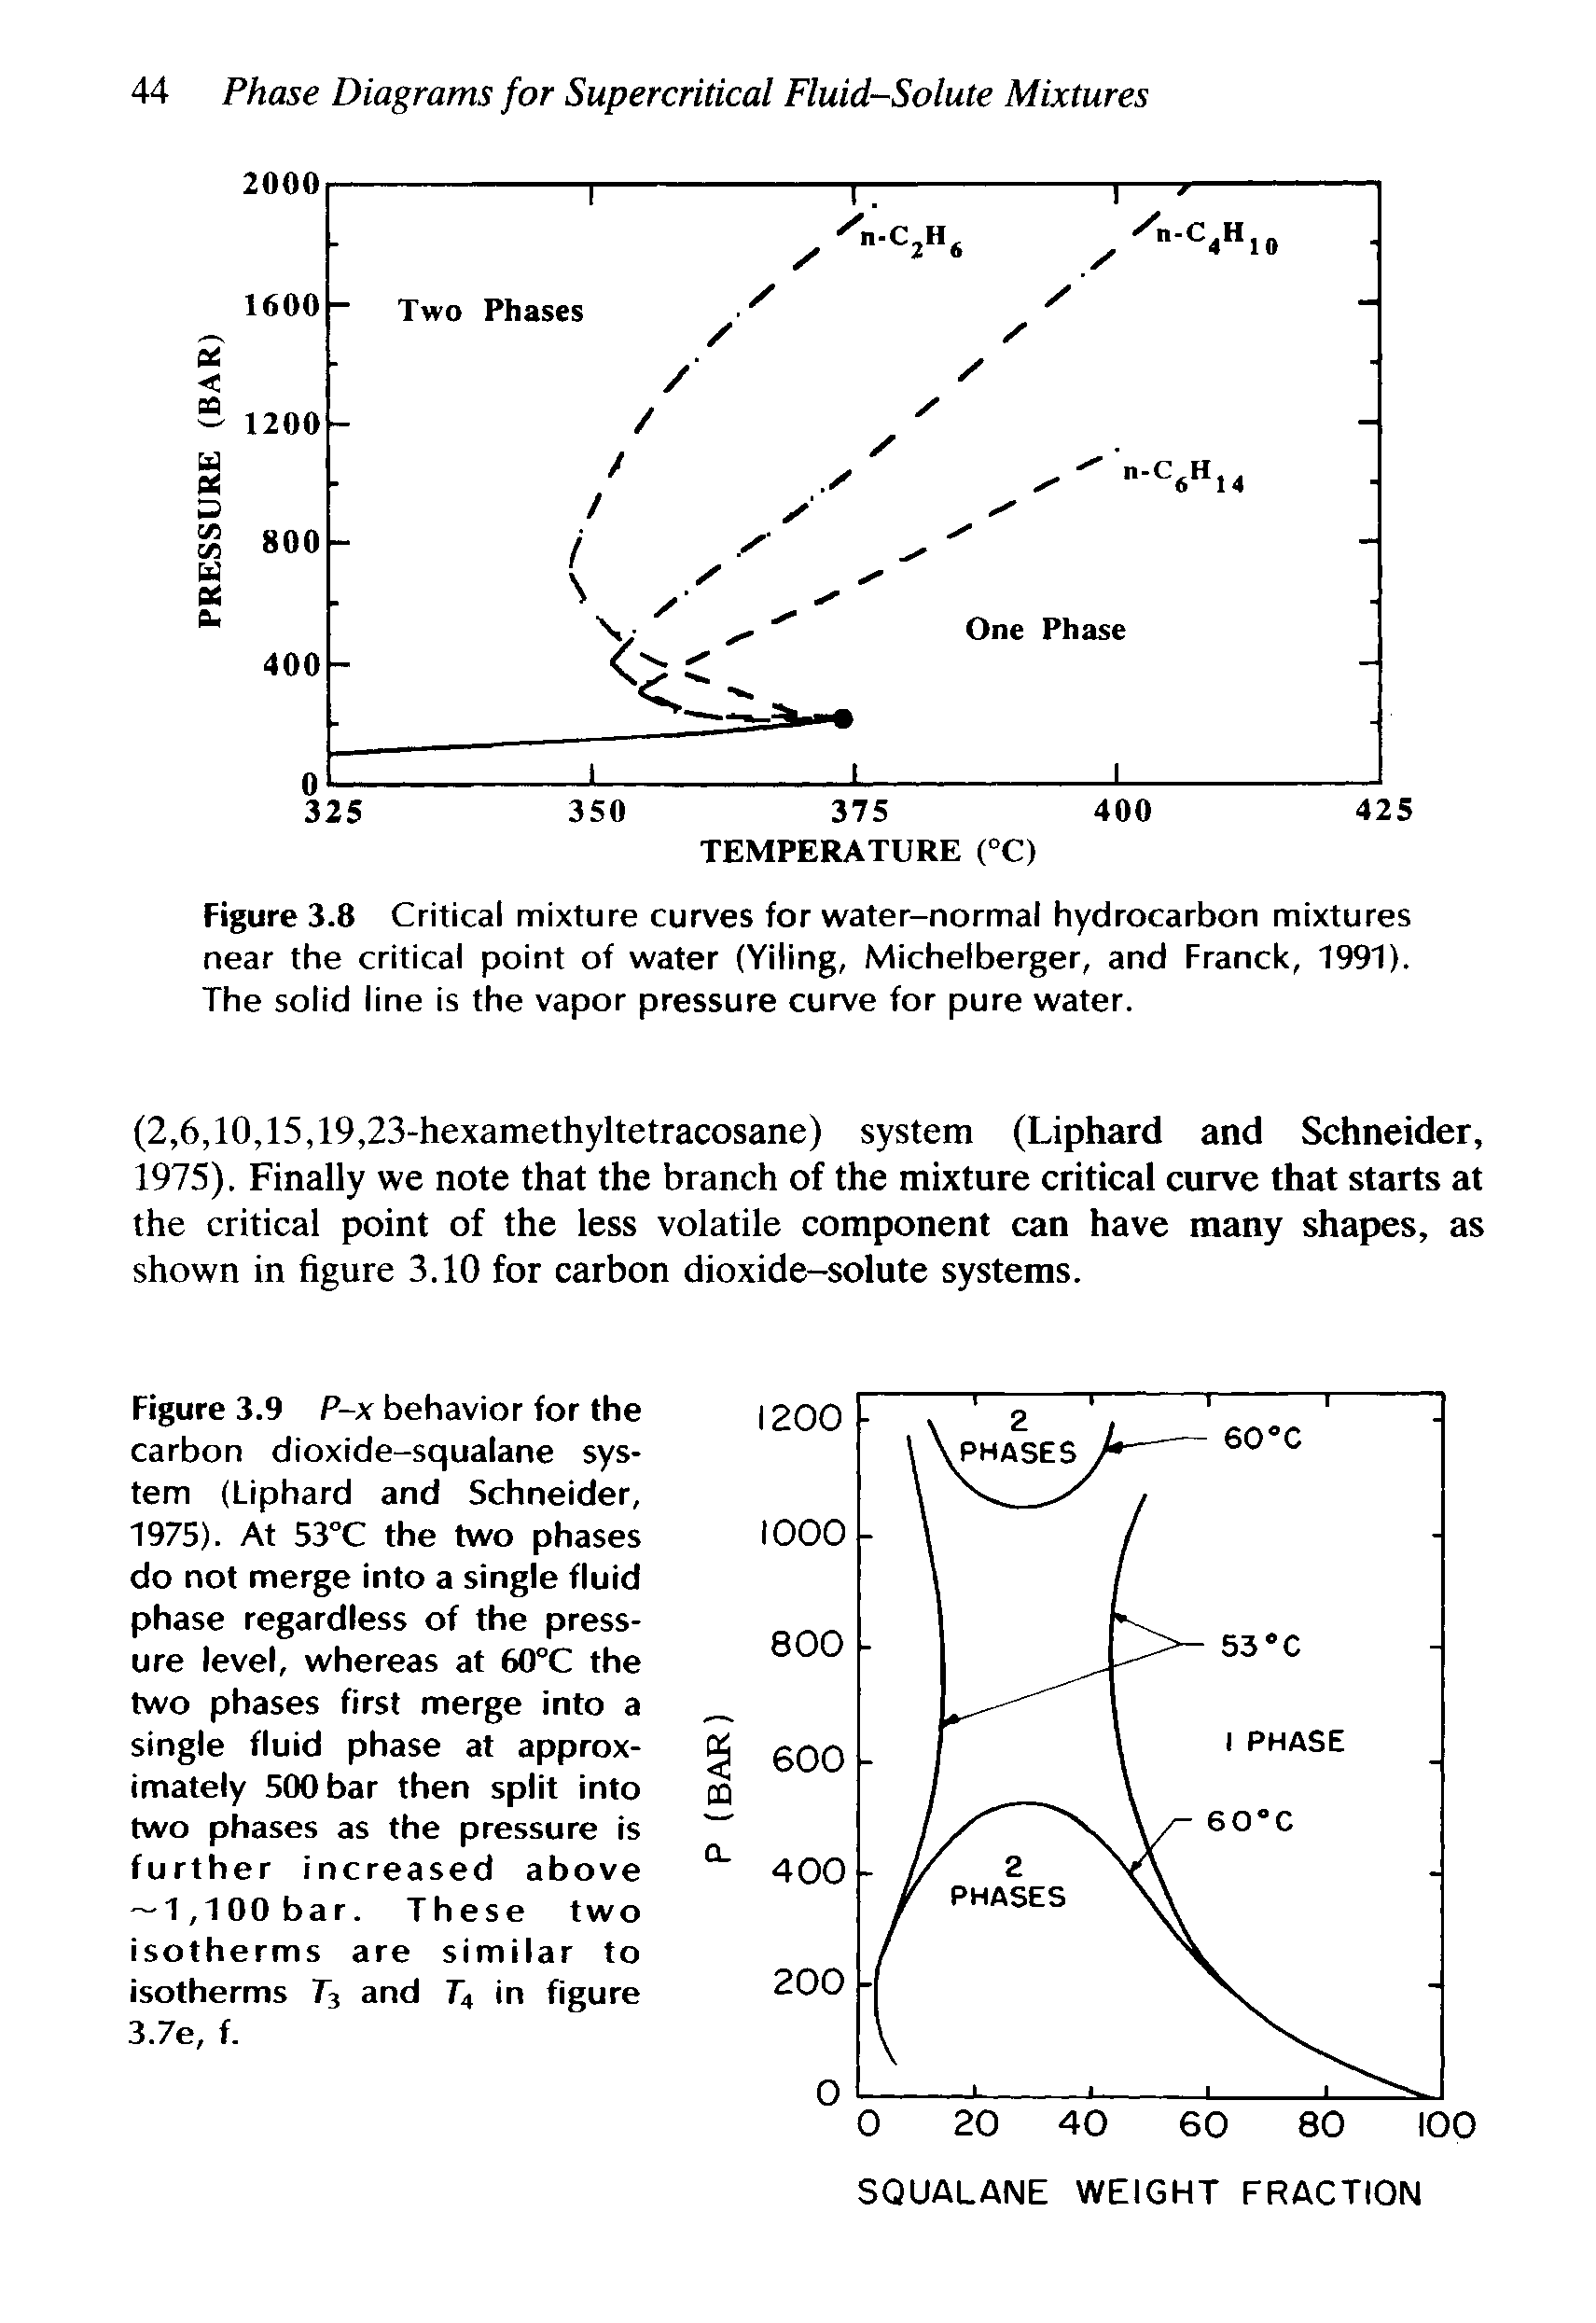 Figure 3.8 Critical mixture curves for water-normal hydrocarbon mixtures near the critical point of water (Yiling, Michelberger, and Franck, 1991). The solid line is the vapor pressure curve for pure water.